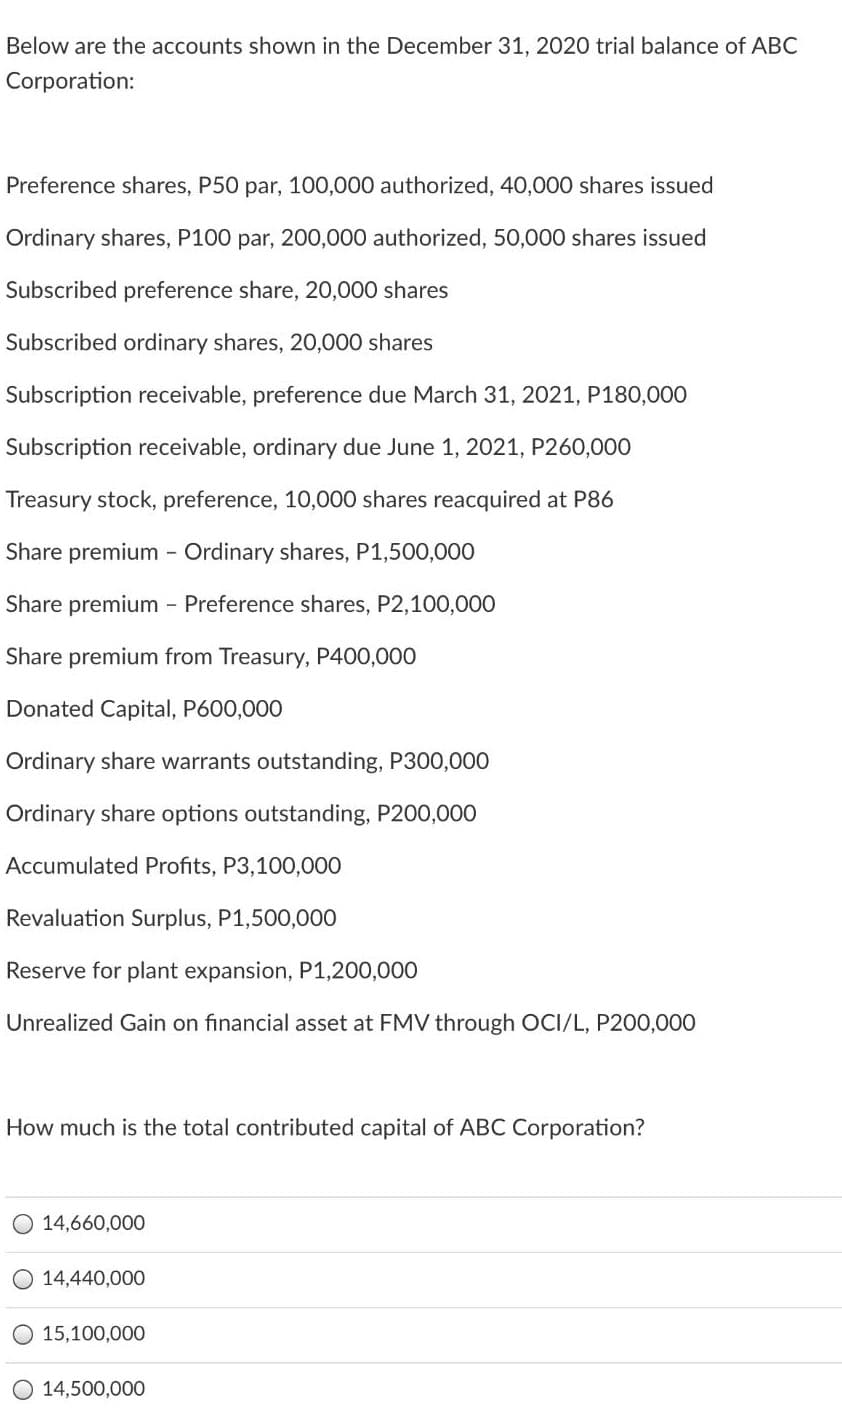 Below are the accounts shown in the December 31, 2020 trial balance of ABC
Corporation:
Preference shares, P50 par, 100,000 authorized, 40,000 shares issued
Ordinary shares, P100 par, 200,000 authorized, 50,000 shares issued
Subscribed preference share, 20,000 shares
Subscribed ordinary shares, 20,000 shares
Subscription receivable, preference due March 31, 2021, P180,000
Subscription receivable, ordinary due June 1, 2021, P260,000
Treasury stock, preference, 10,000 shares reacquired at P86
Share premium Ordinary shares, P1,500,000
Share premium - Preference shares, P2,100,000
Share premium from Treasury, P400,000
Donated Capital, P600,000
Ordinary share warrants outstanding, P300,000
Ordinary share options outstanding, P200,000
Accumulated Profits, P3,100,000
Revaluation Surplus, P1,500,000
Reserve for plant expansion, P1,200,000
Unrealized Gain on financial asset at FMV through OCI/L, P200,000
How much is the total contributed capital of ABC Corporation?
O 14,660,000
14,440,000
15,100,000
O 14,500,000
